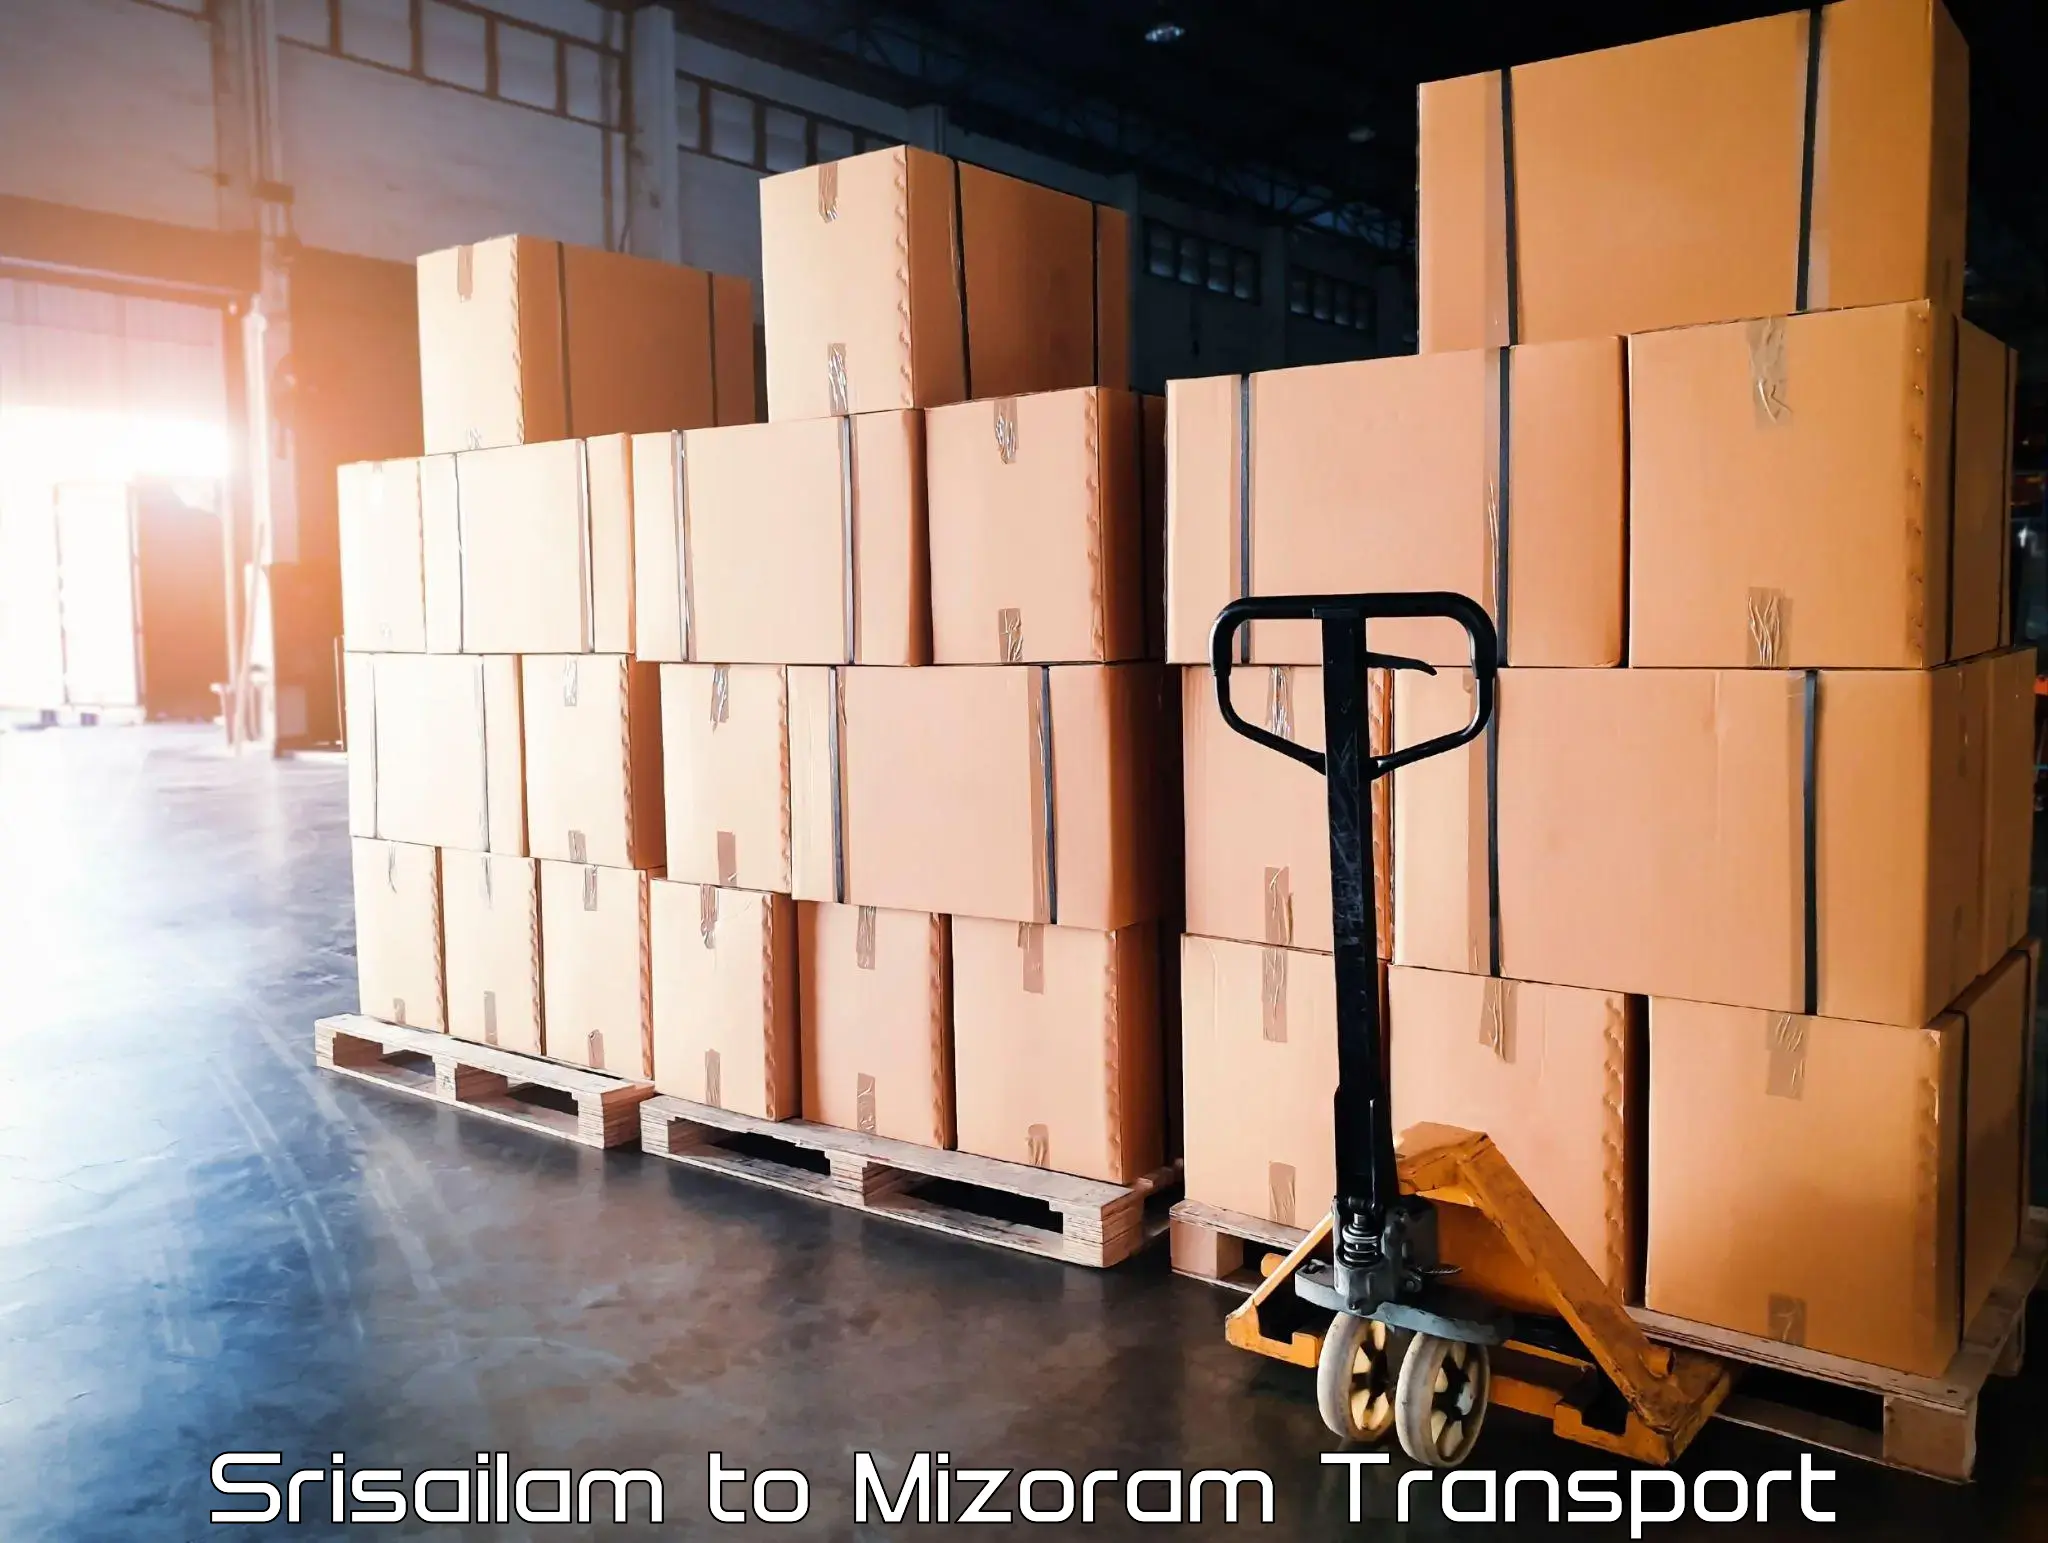 Transport bike from one state to another Srisailam to Mizoram